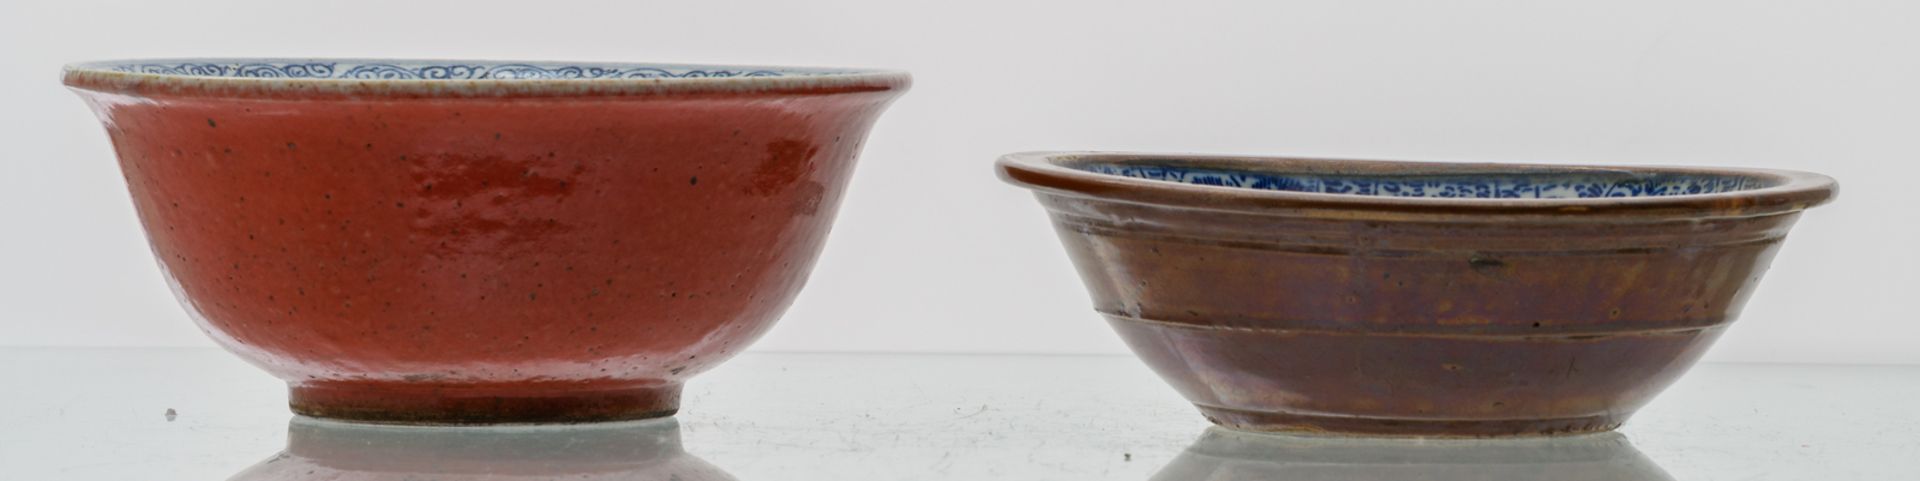 Two Chinese blue and white floral decorated bowls, the outside brown / red glazed, H 8 - 11,5 - ø - Image 7 of 7